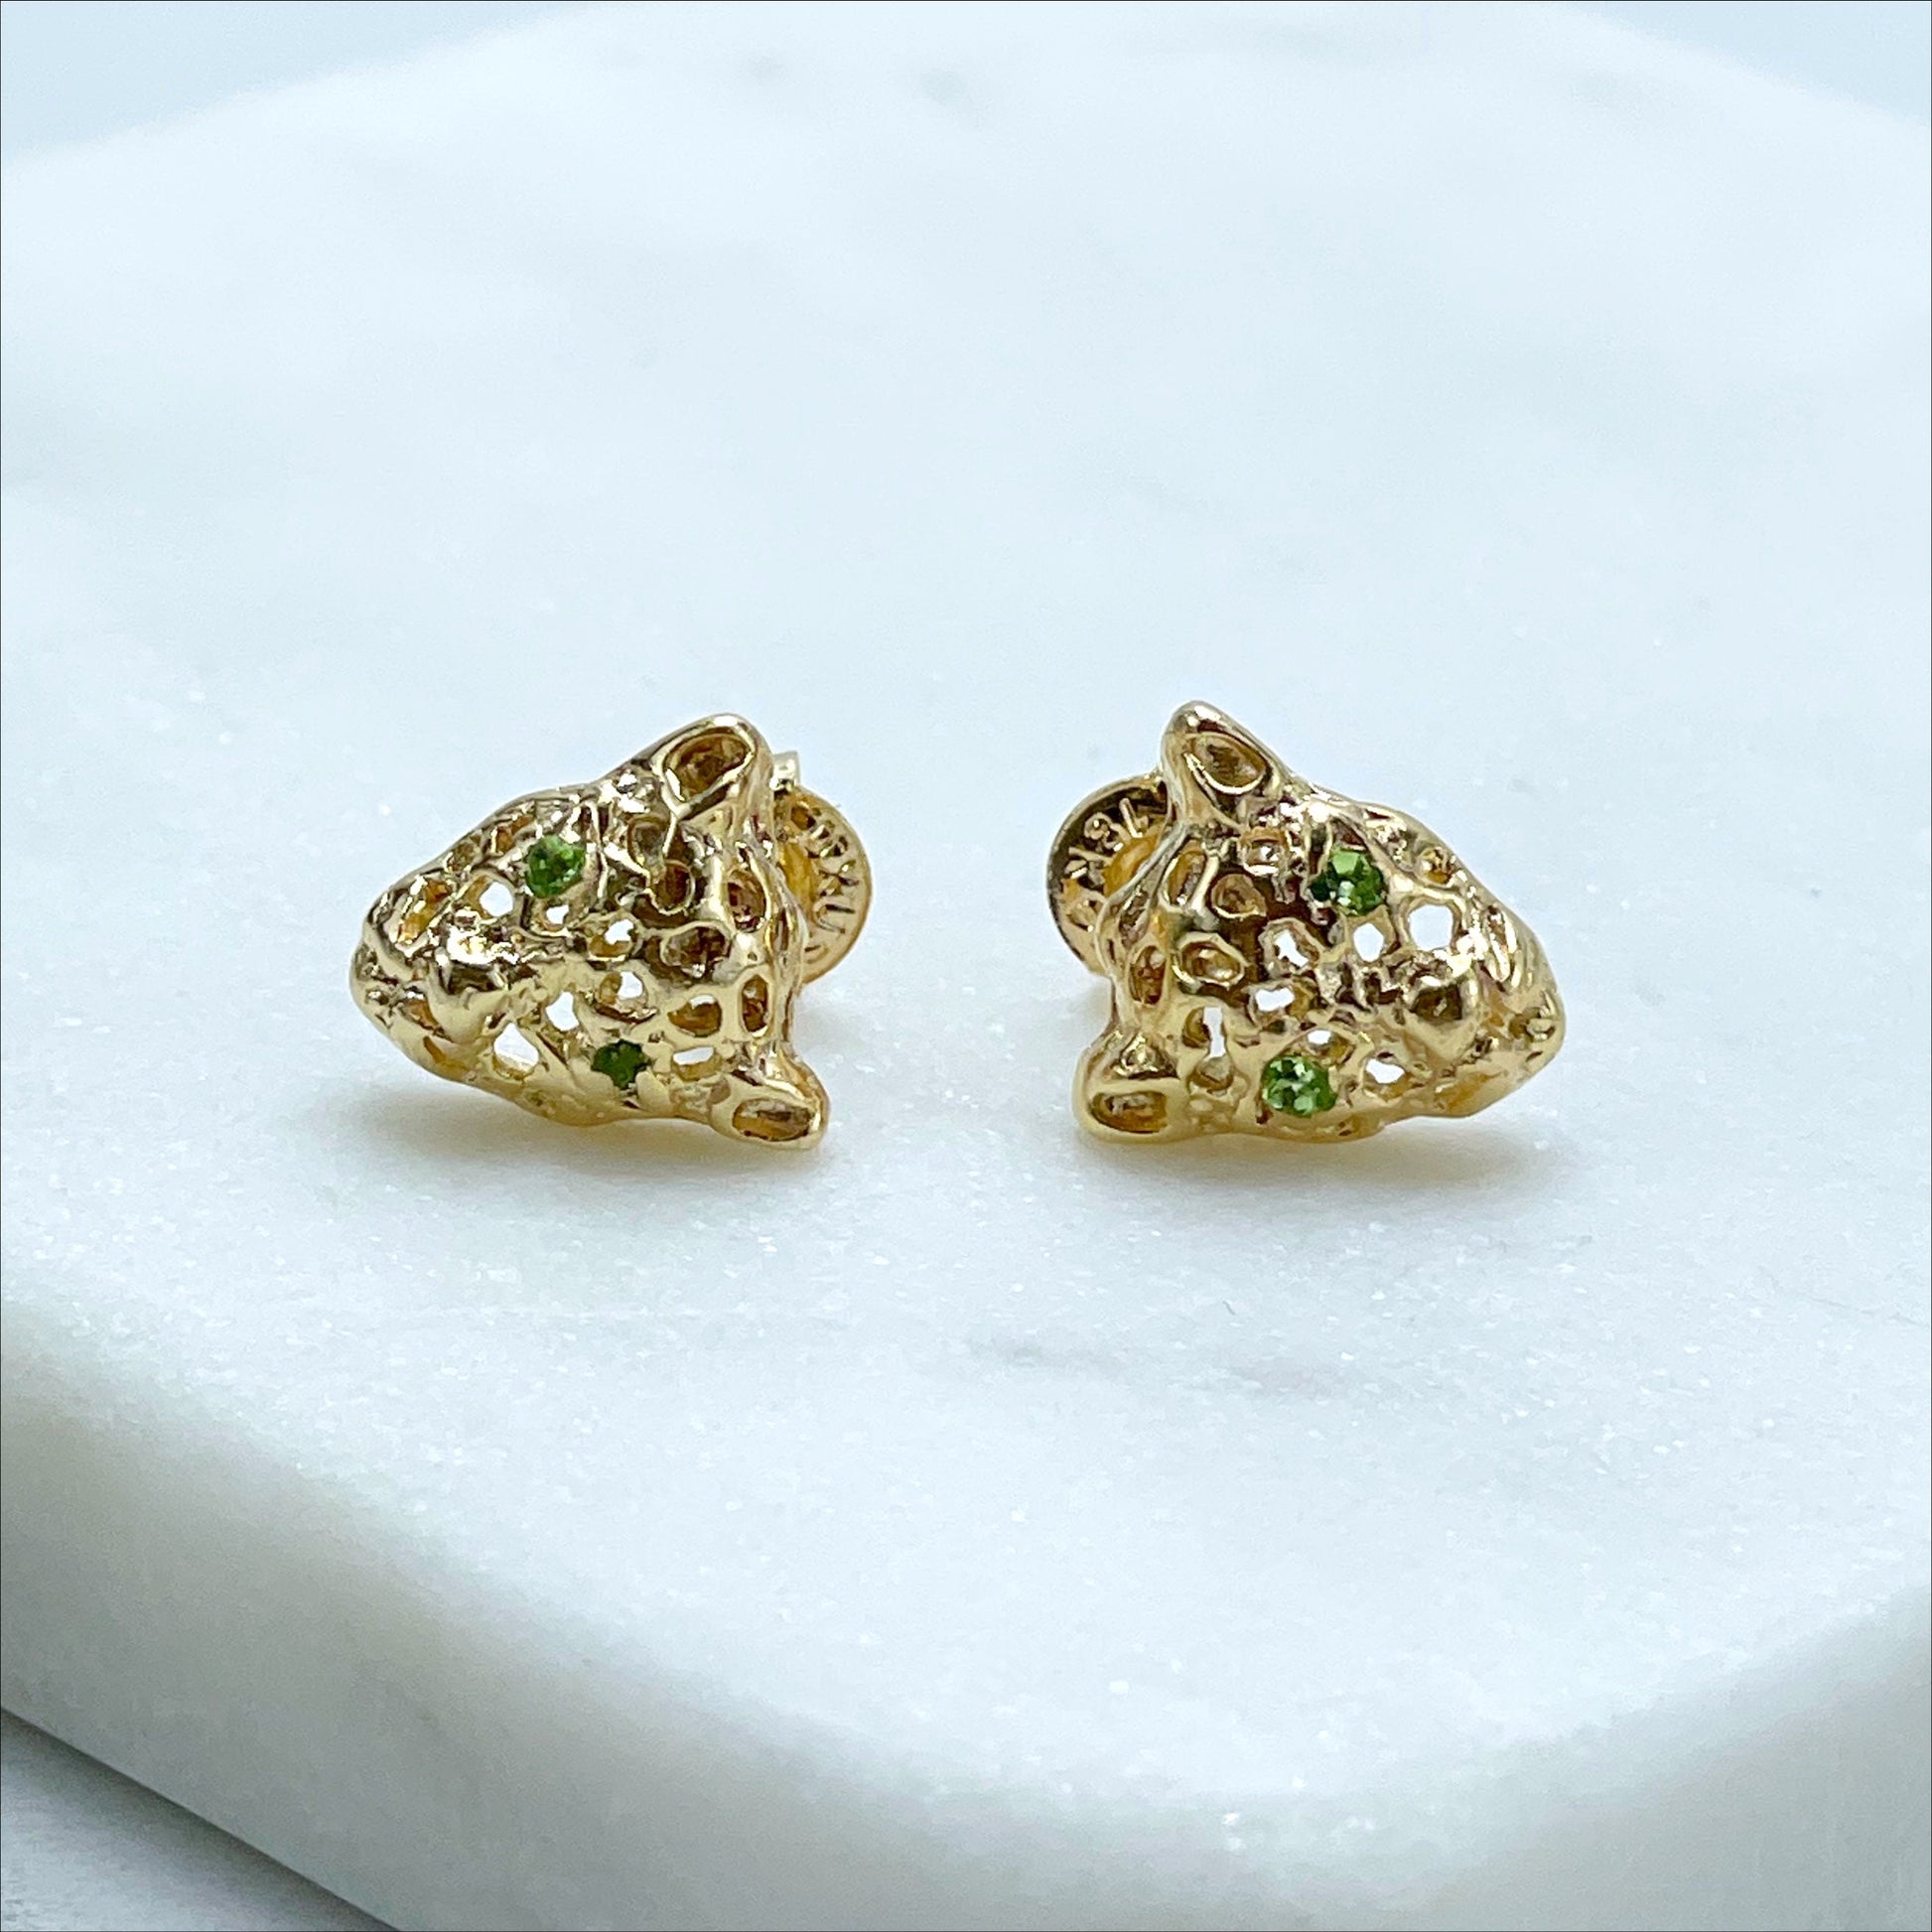 18k Gold Filled Micro Cubic Zirconia with Cutie Panther Head Shape Stud Earrings or Bracelet as a Set, Wholesale Jewelry Making Supplies